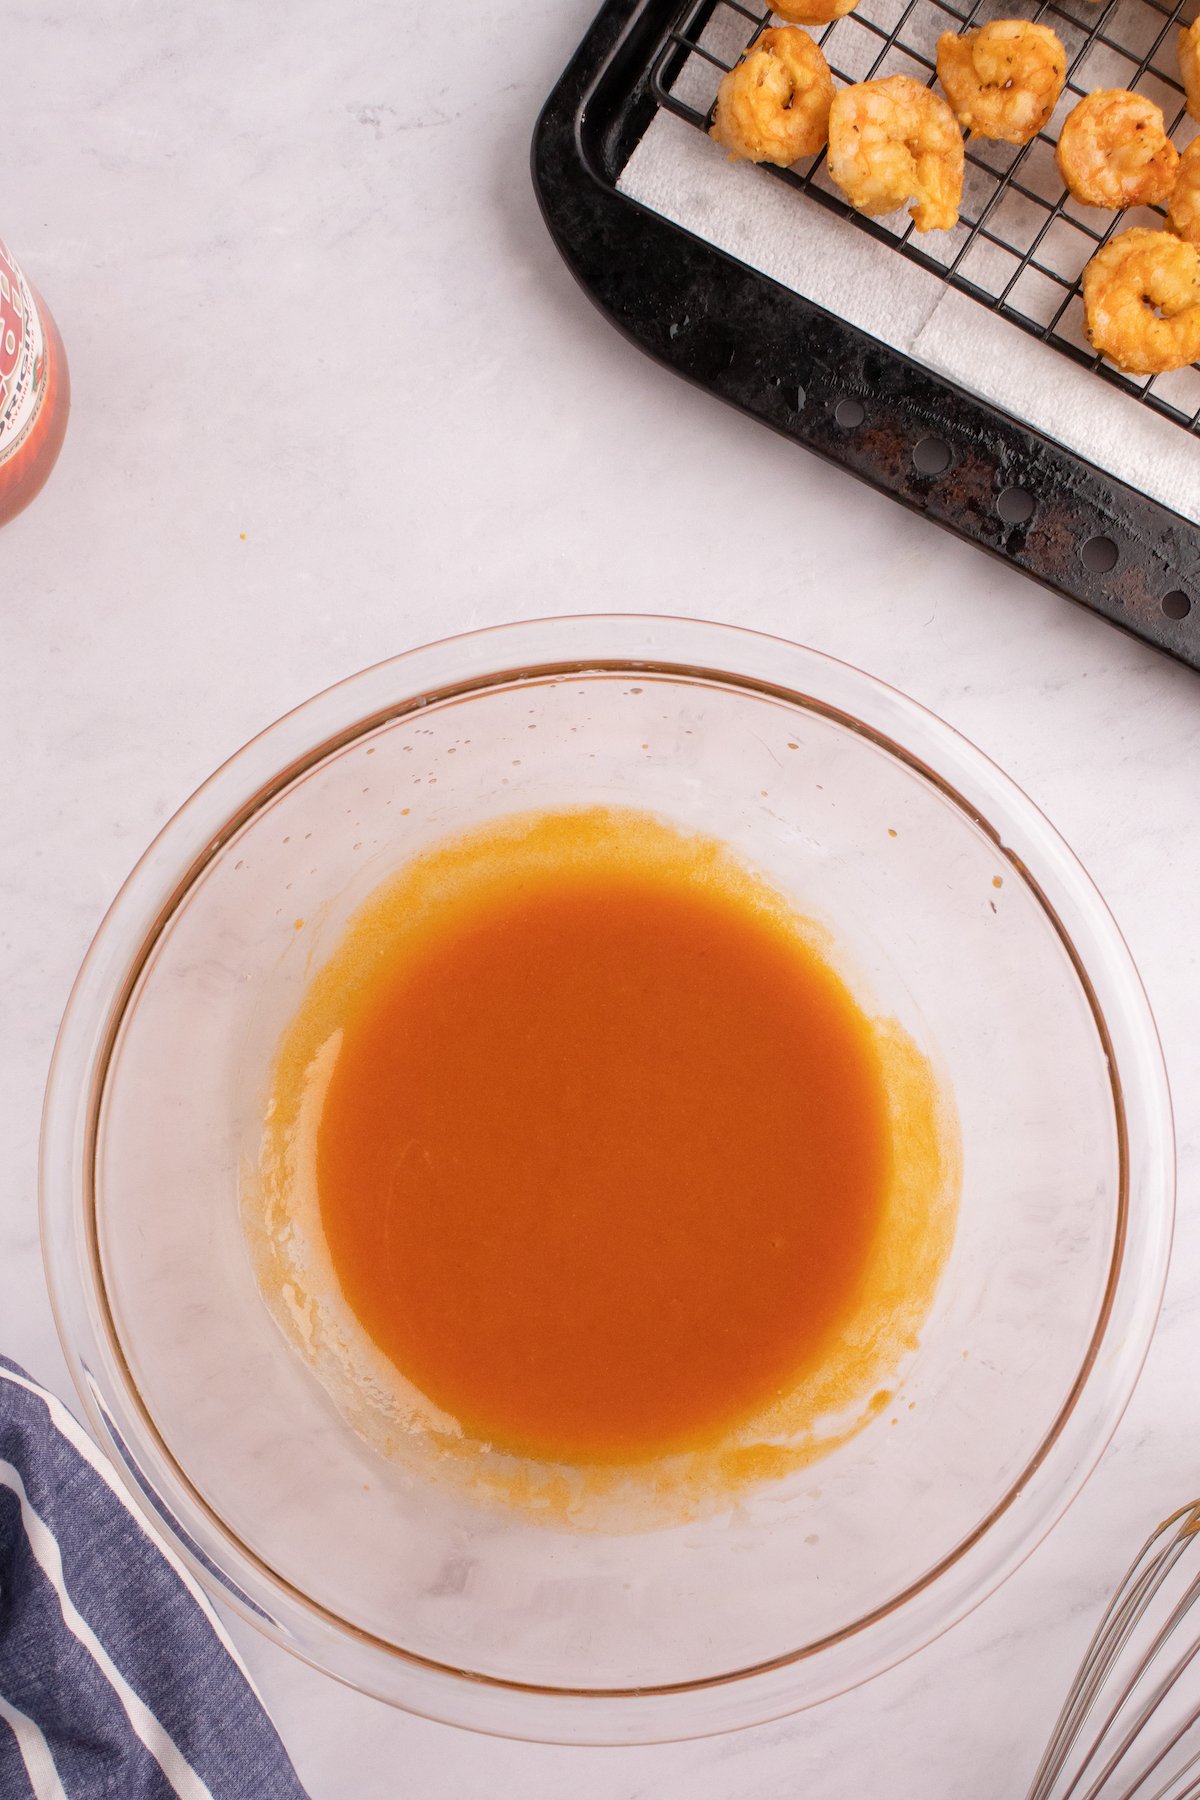 A glass mixing bowl filled with hot sauce and melted butter.